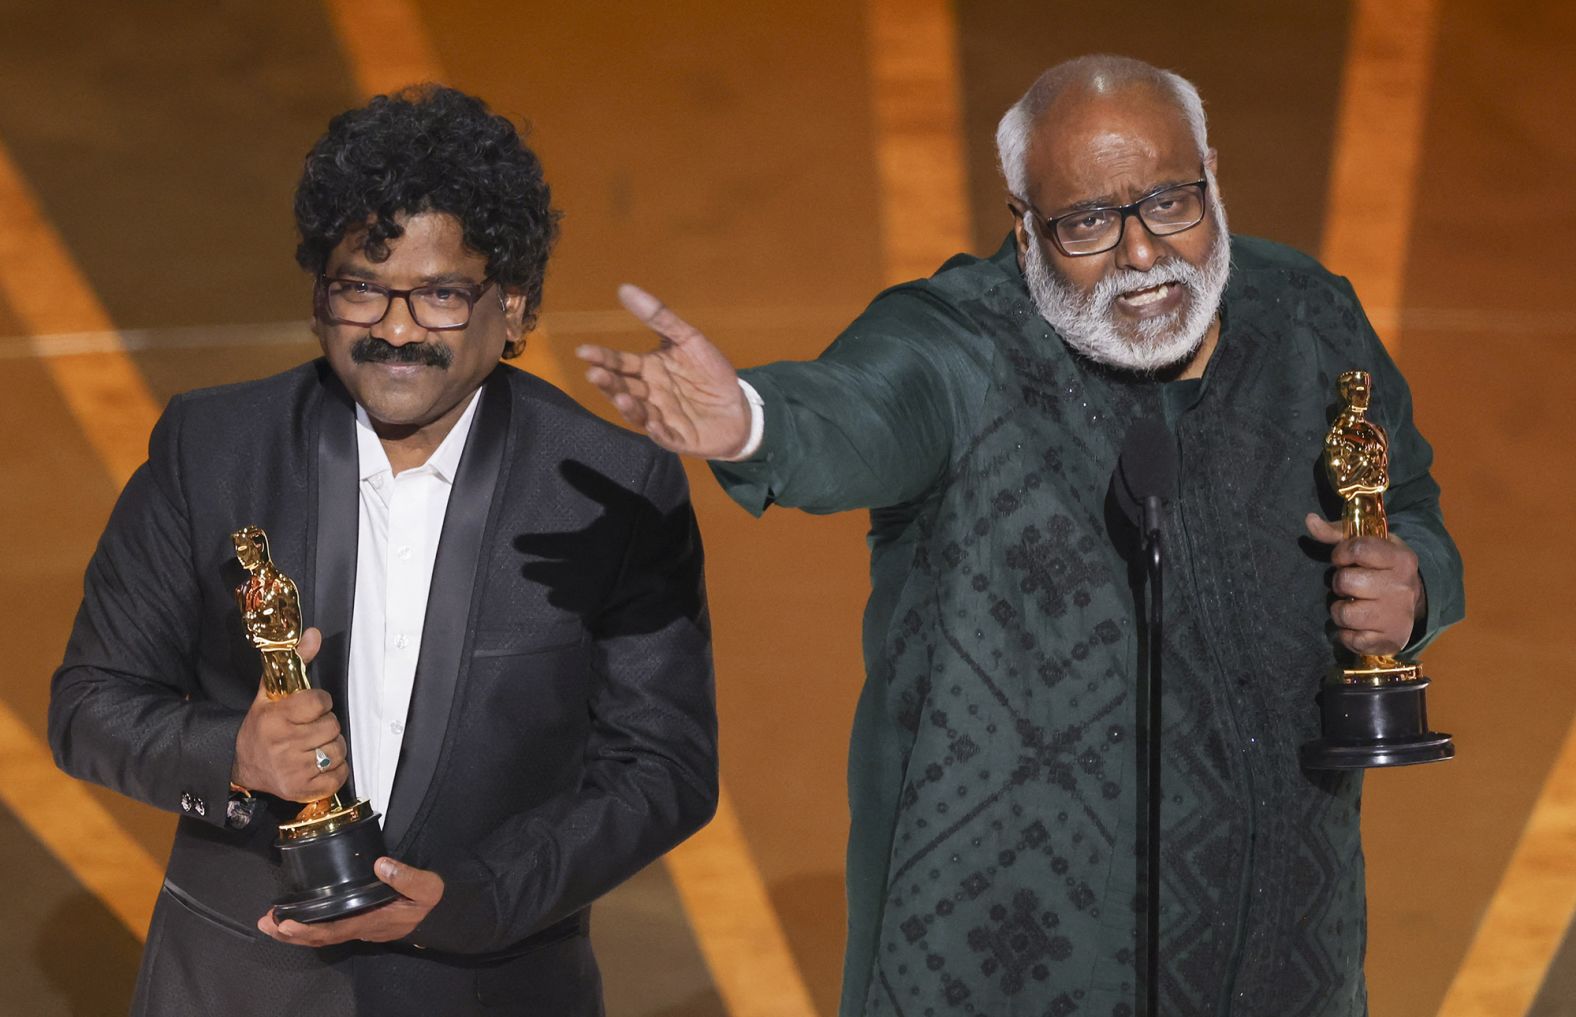 Chandrabose, left, and M.M. Keeravaani accept the Oscar for best original song  ("Naatu Naatu" from the film "RRR"). Keeravaani wrote the music, while Chandrabose wrote the lyrics. "I grew up listening to The Carpenters and now here I am with the Oscars," Keeravaani said before going on to <a href="index.php?page=&url=https%3A%2F%2Fwww.cnn.com%2Fentertainment%2Flive-news%2Foscars-2023%2Fh_2452ff1a00c4f0c8ab0149cf89ffbfc8" target="_blank">sing his speech</a> to the tune of "Top of the World" by The Carpenters. "Naatu Naatu" is the first song from an Indian film to be nominated for an Oscar.